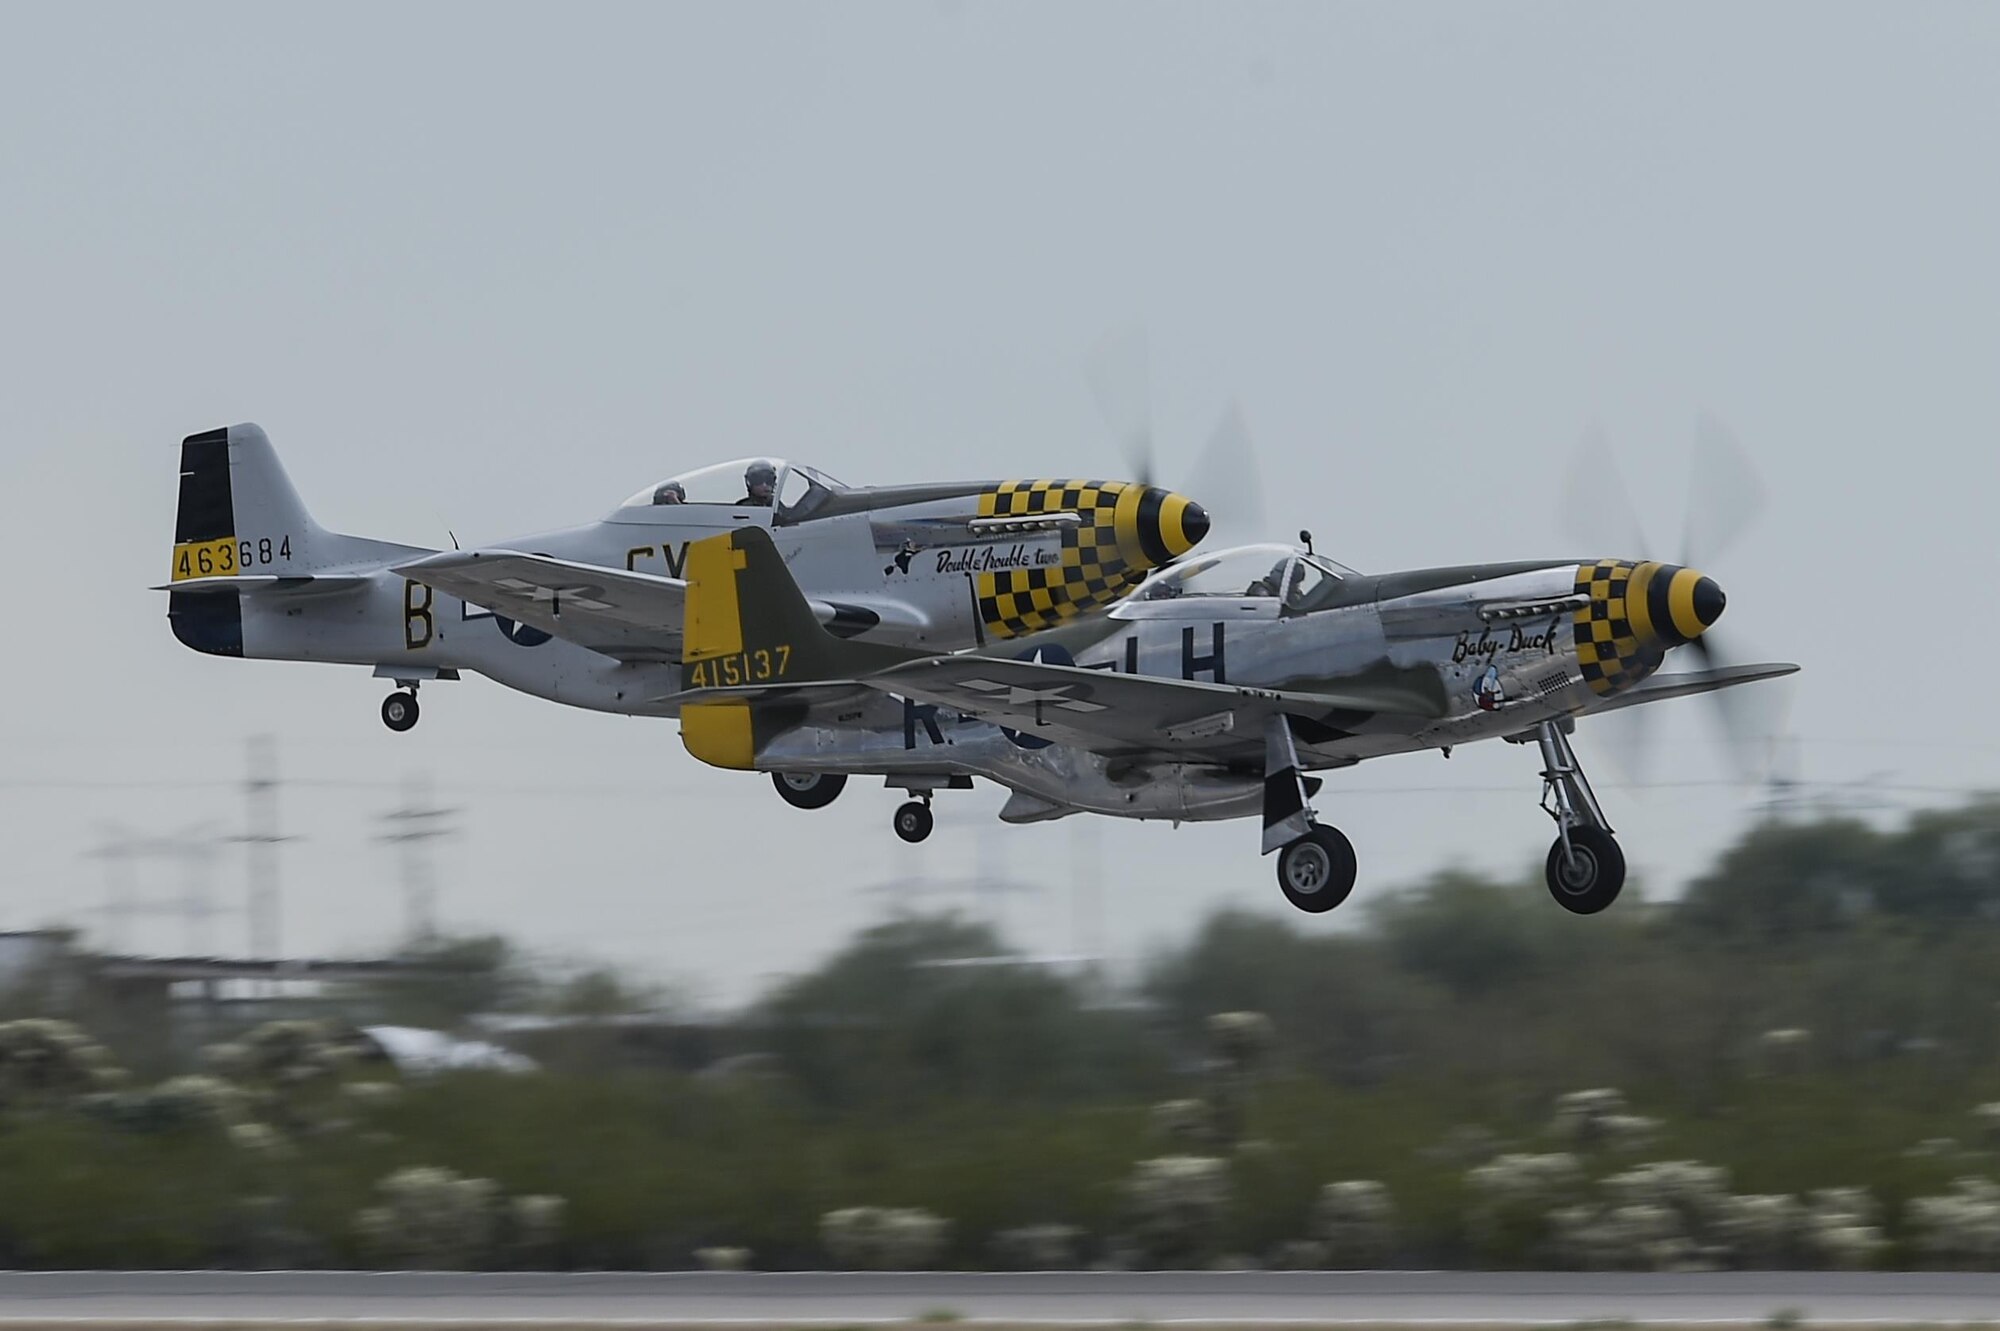 Two P-51 Mustangs take off during the 2017 Heritage Flight Training and Certification Course at Davis-Monthan Air Force Base, Ariz., Feb. 12, 2017. During the course, aircrews practice ground and flight training to enable civilian pilots of historic military aircraft and U.S. Air Force pilots of current fighter aircraft to fly safely in formations together. (U.S. Air Force photo by Senior Airman Chris Drzazgowski)